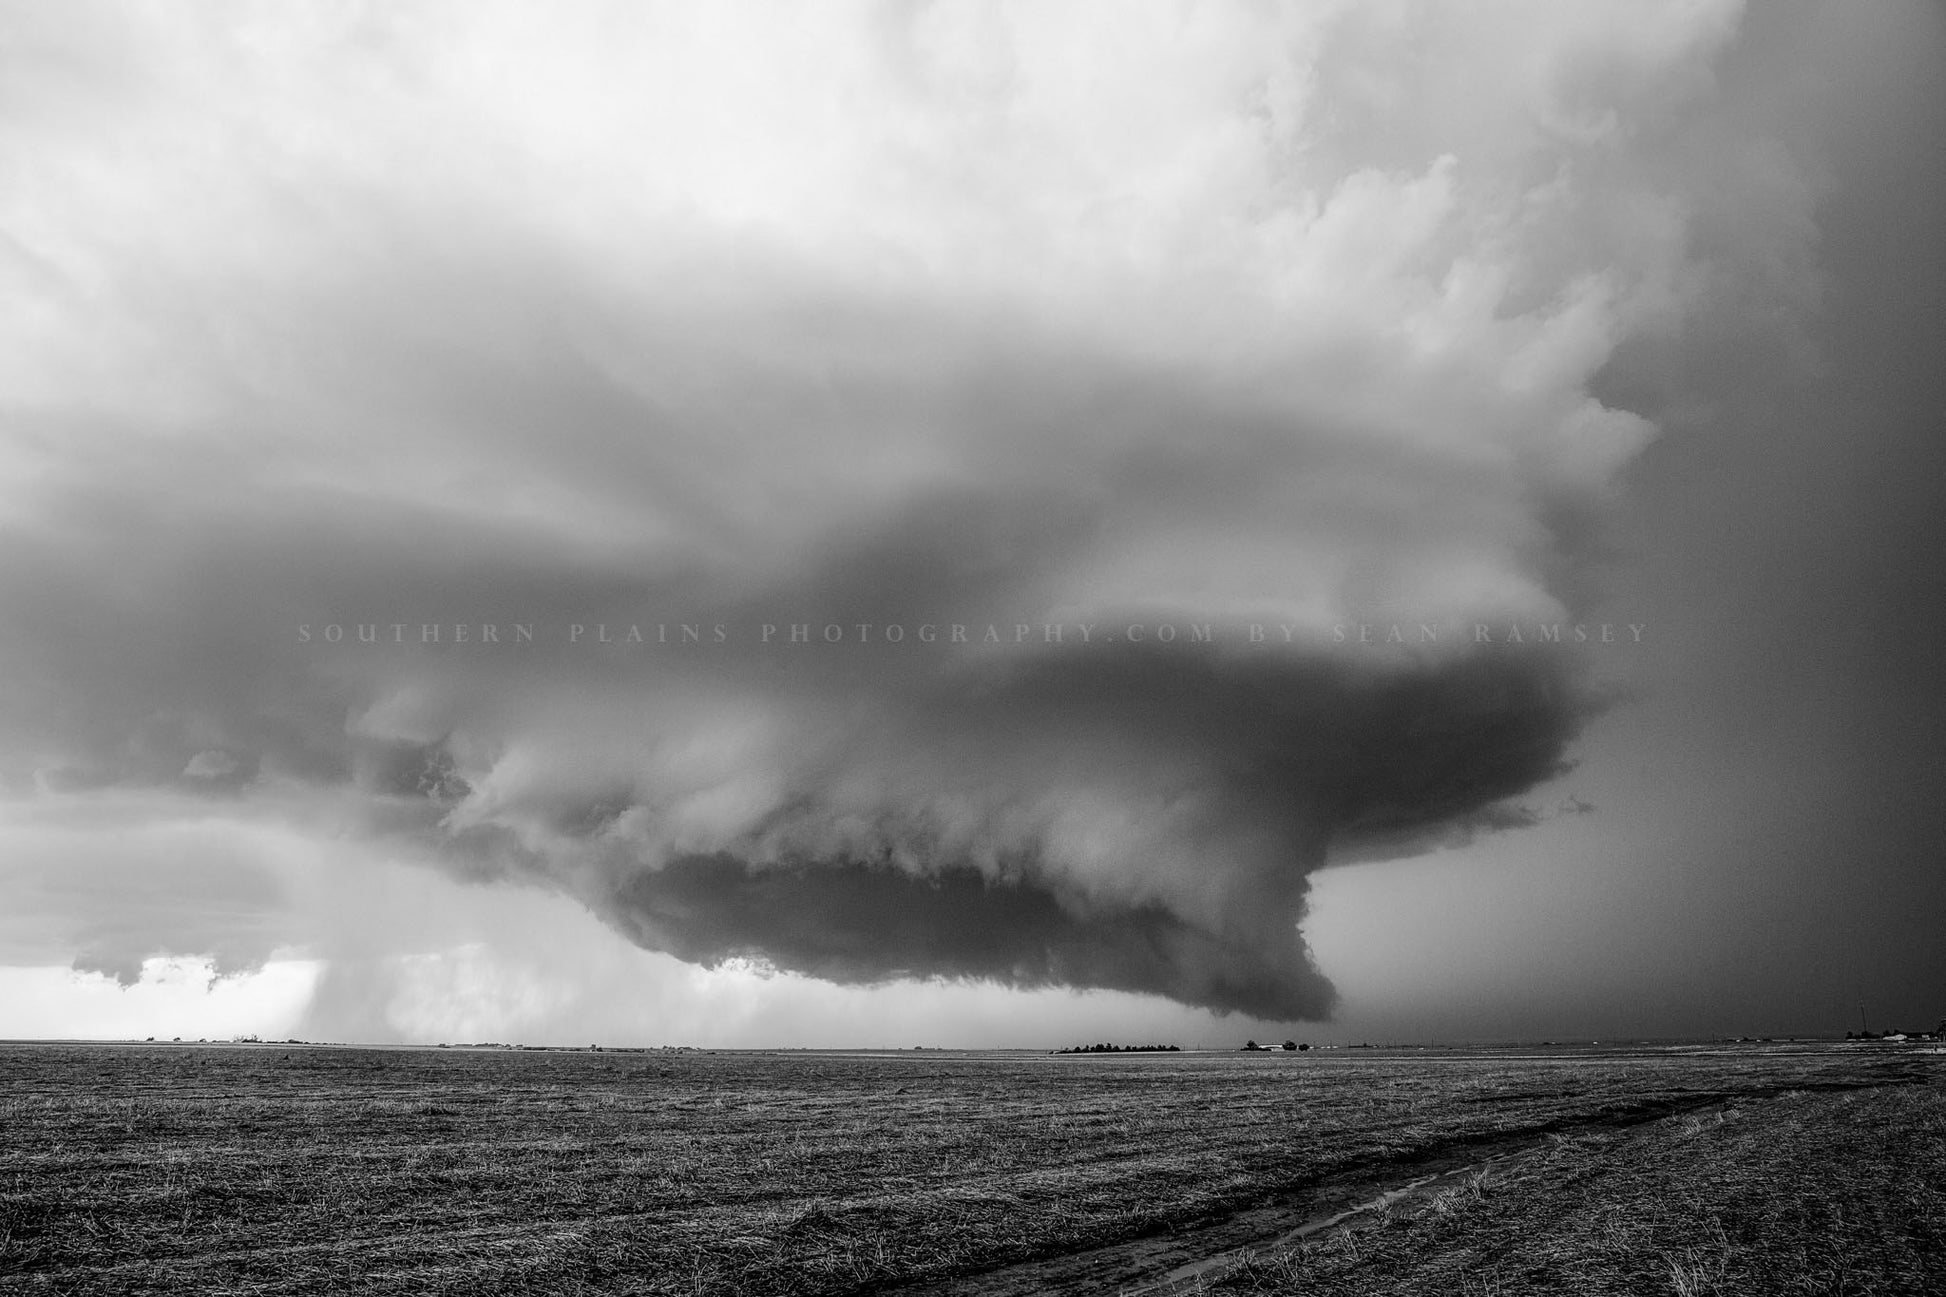 Black and white storm photography print of a supercell thunderstorm with wall cloud lowering toward the ground over a barren field on a stormy spring day in Kansas by Sean Ramsey of Southern Plains Photography.